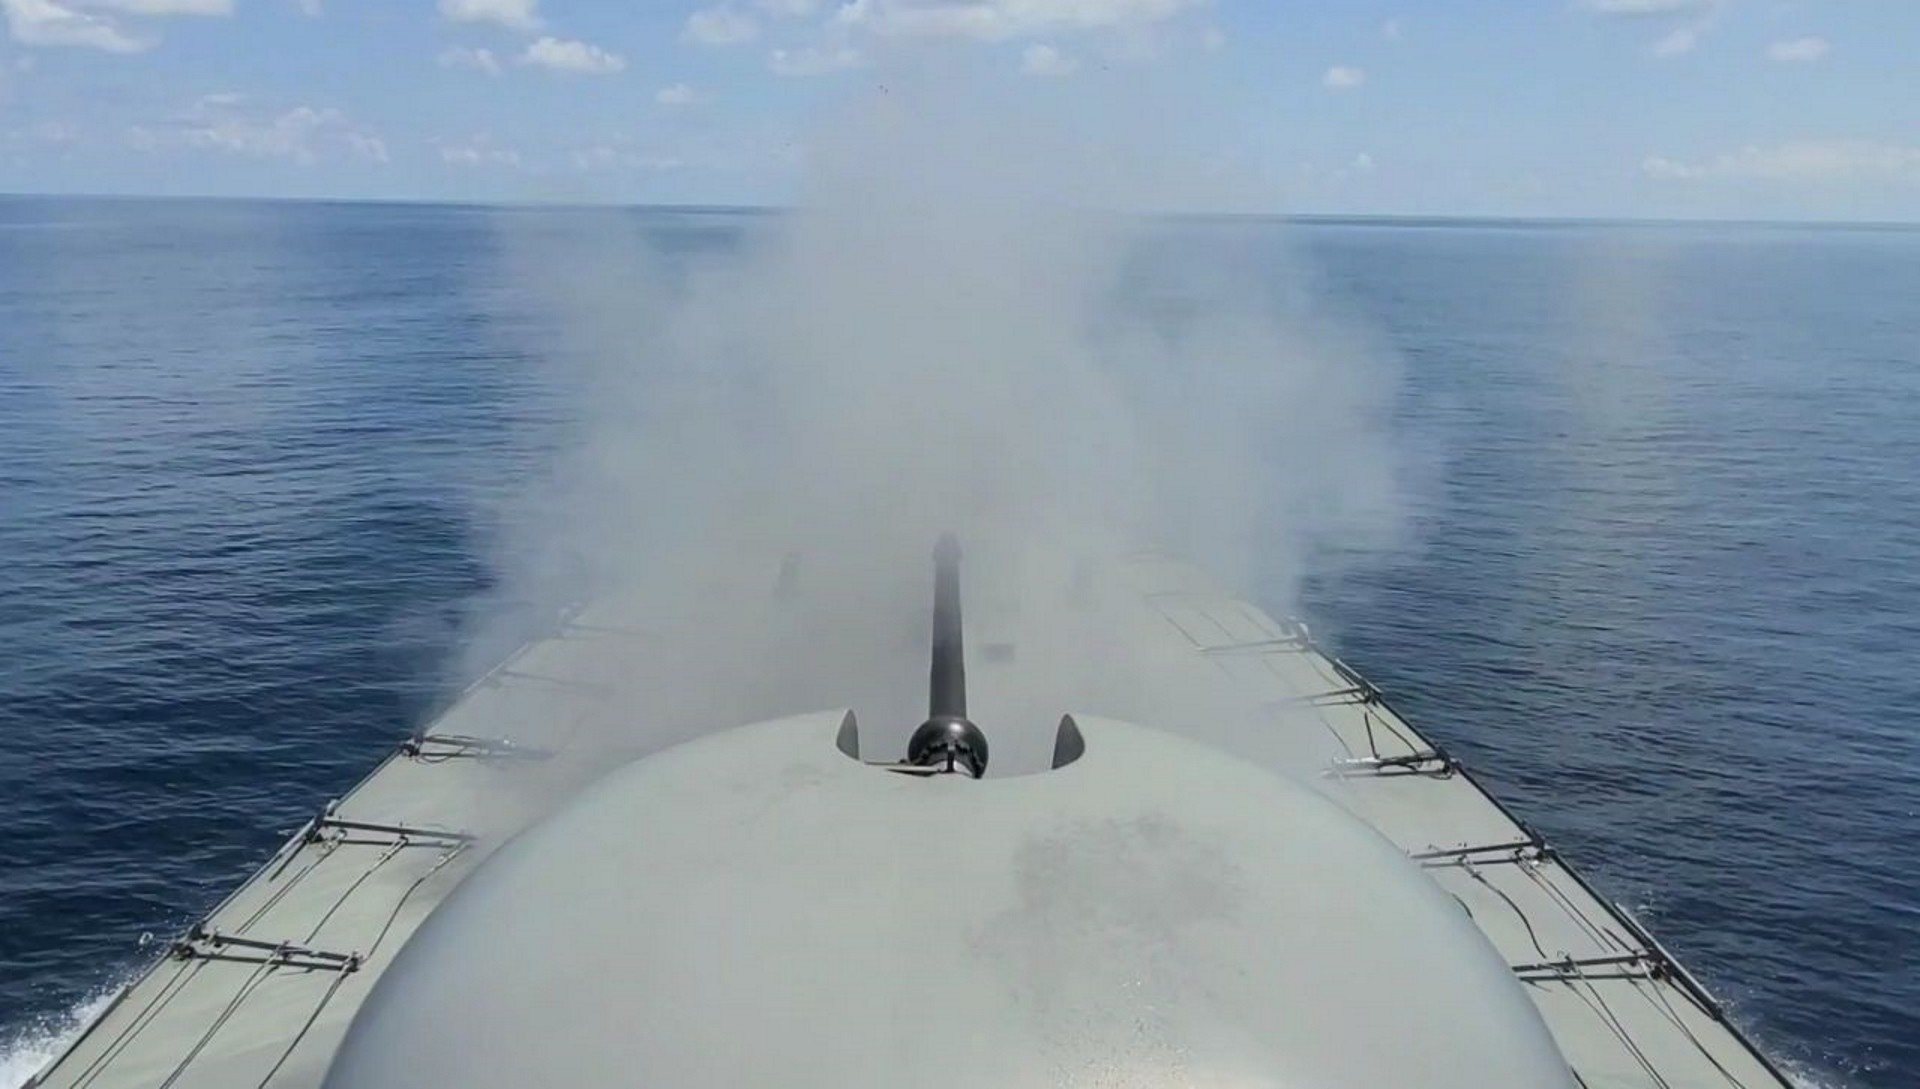 RSS Vigilance firing its A-Gun at a simulated surface target during a gunnery exercise